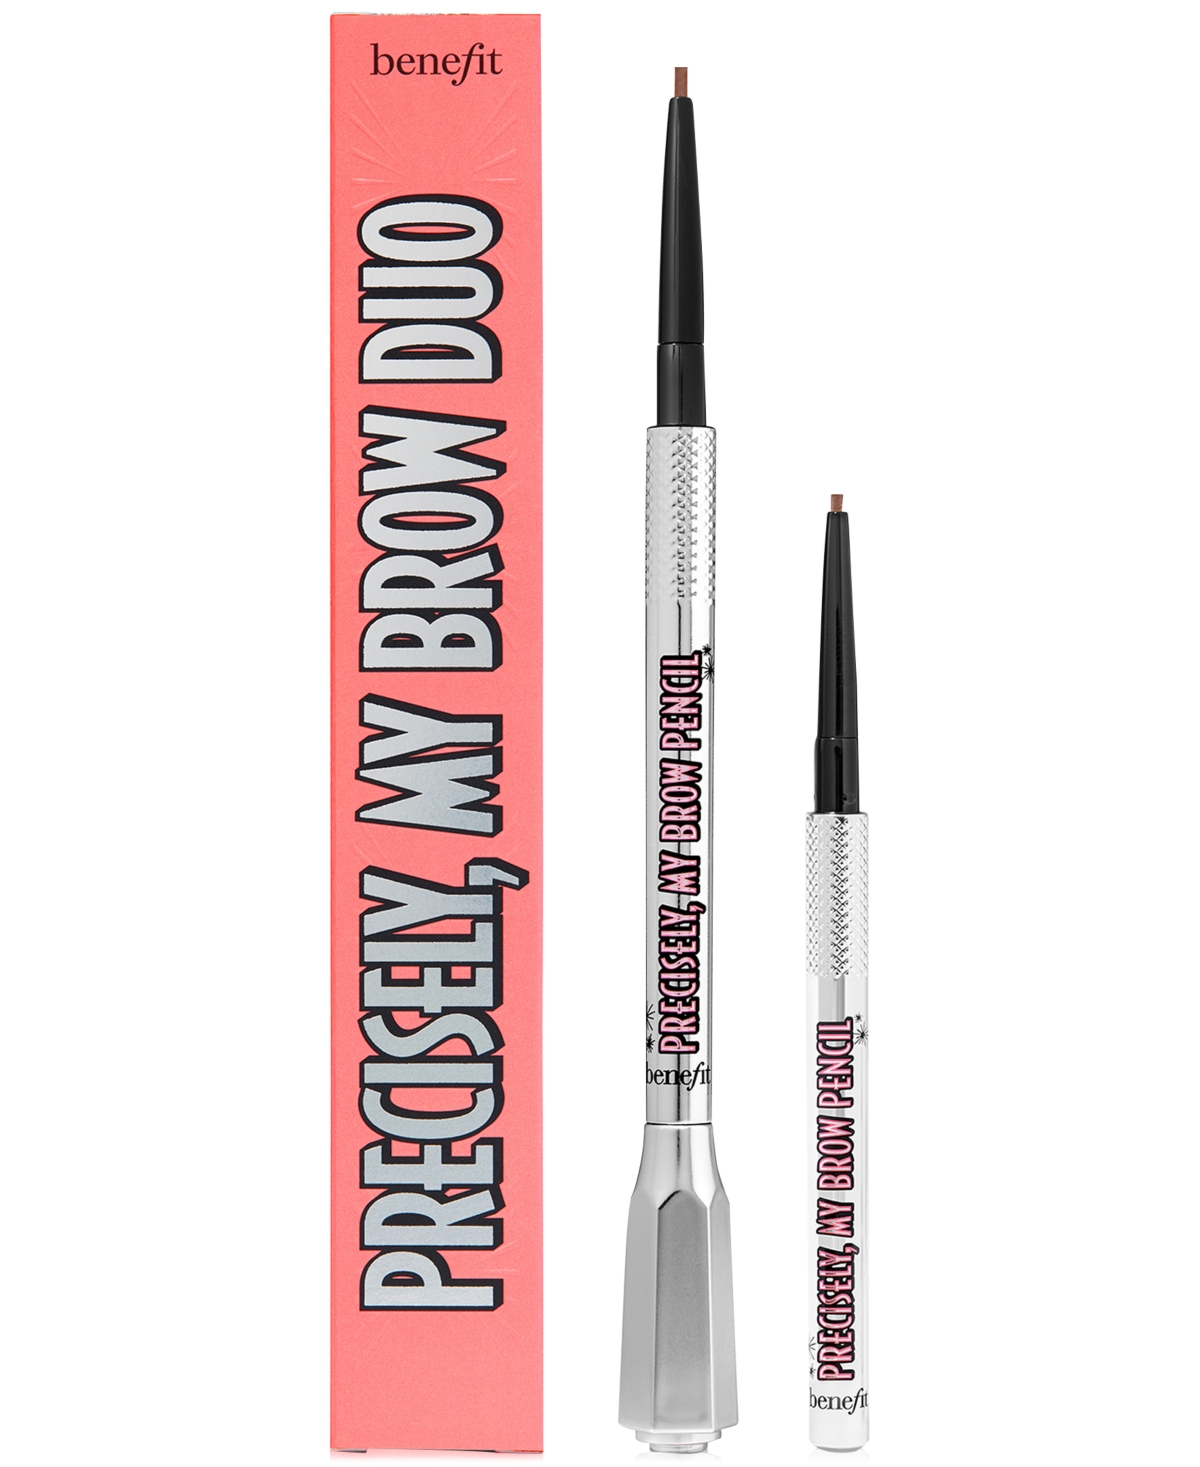 Benefit Cosmetics 2-pc. Precisely, My Brow Defining Eyebrow Pencil Set In Warm Light Brown